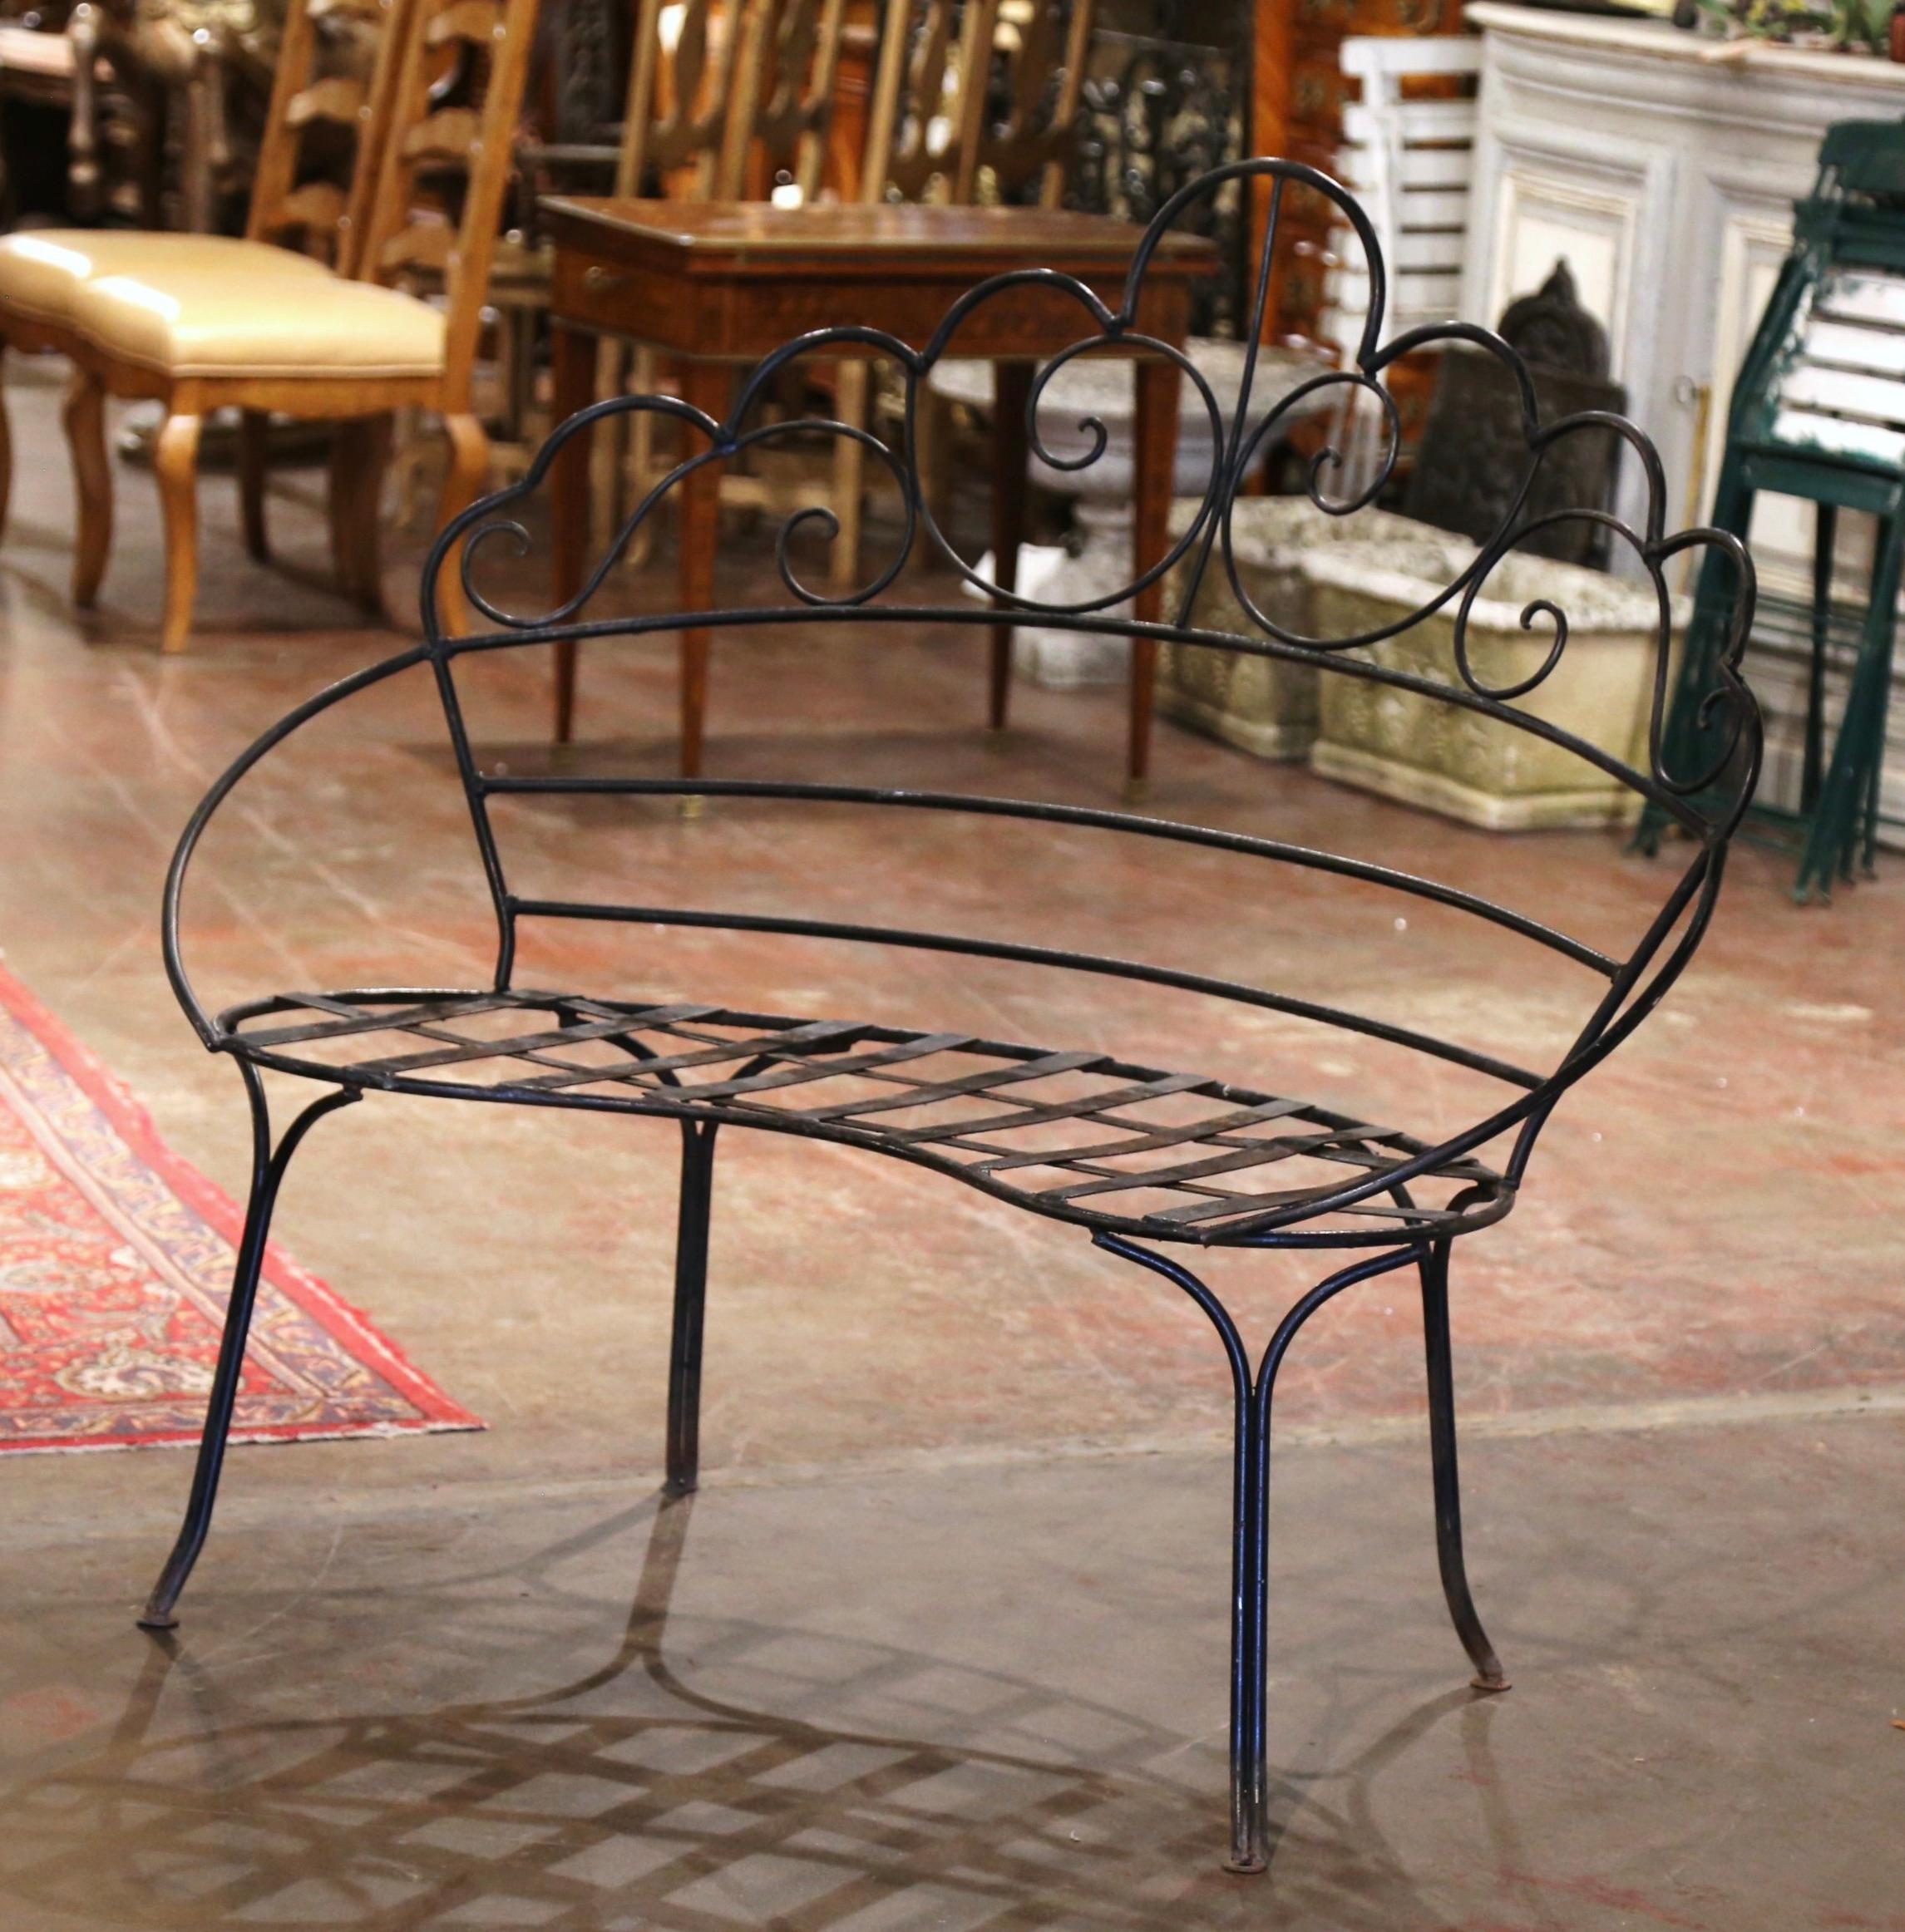 Early 20th Century French Curved Two-Seat Iron Garden Bench Settee from Normandy For Sale 1